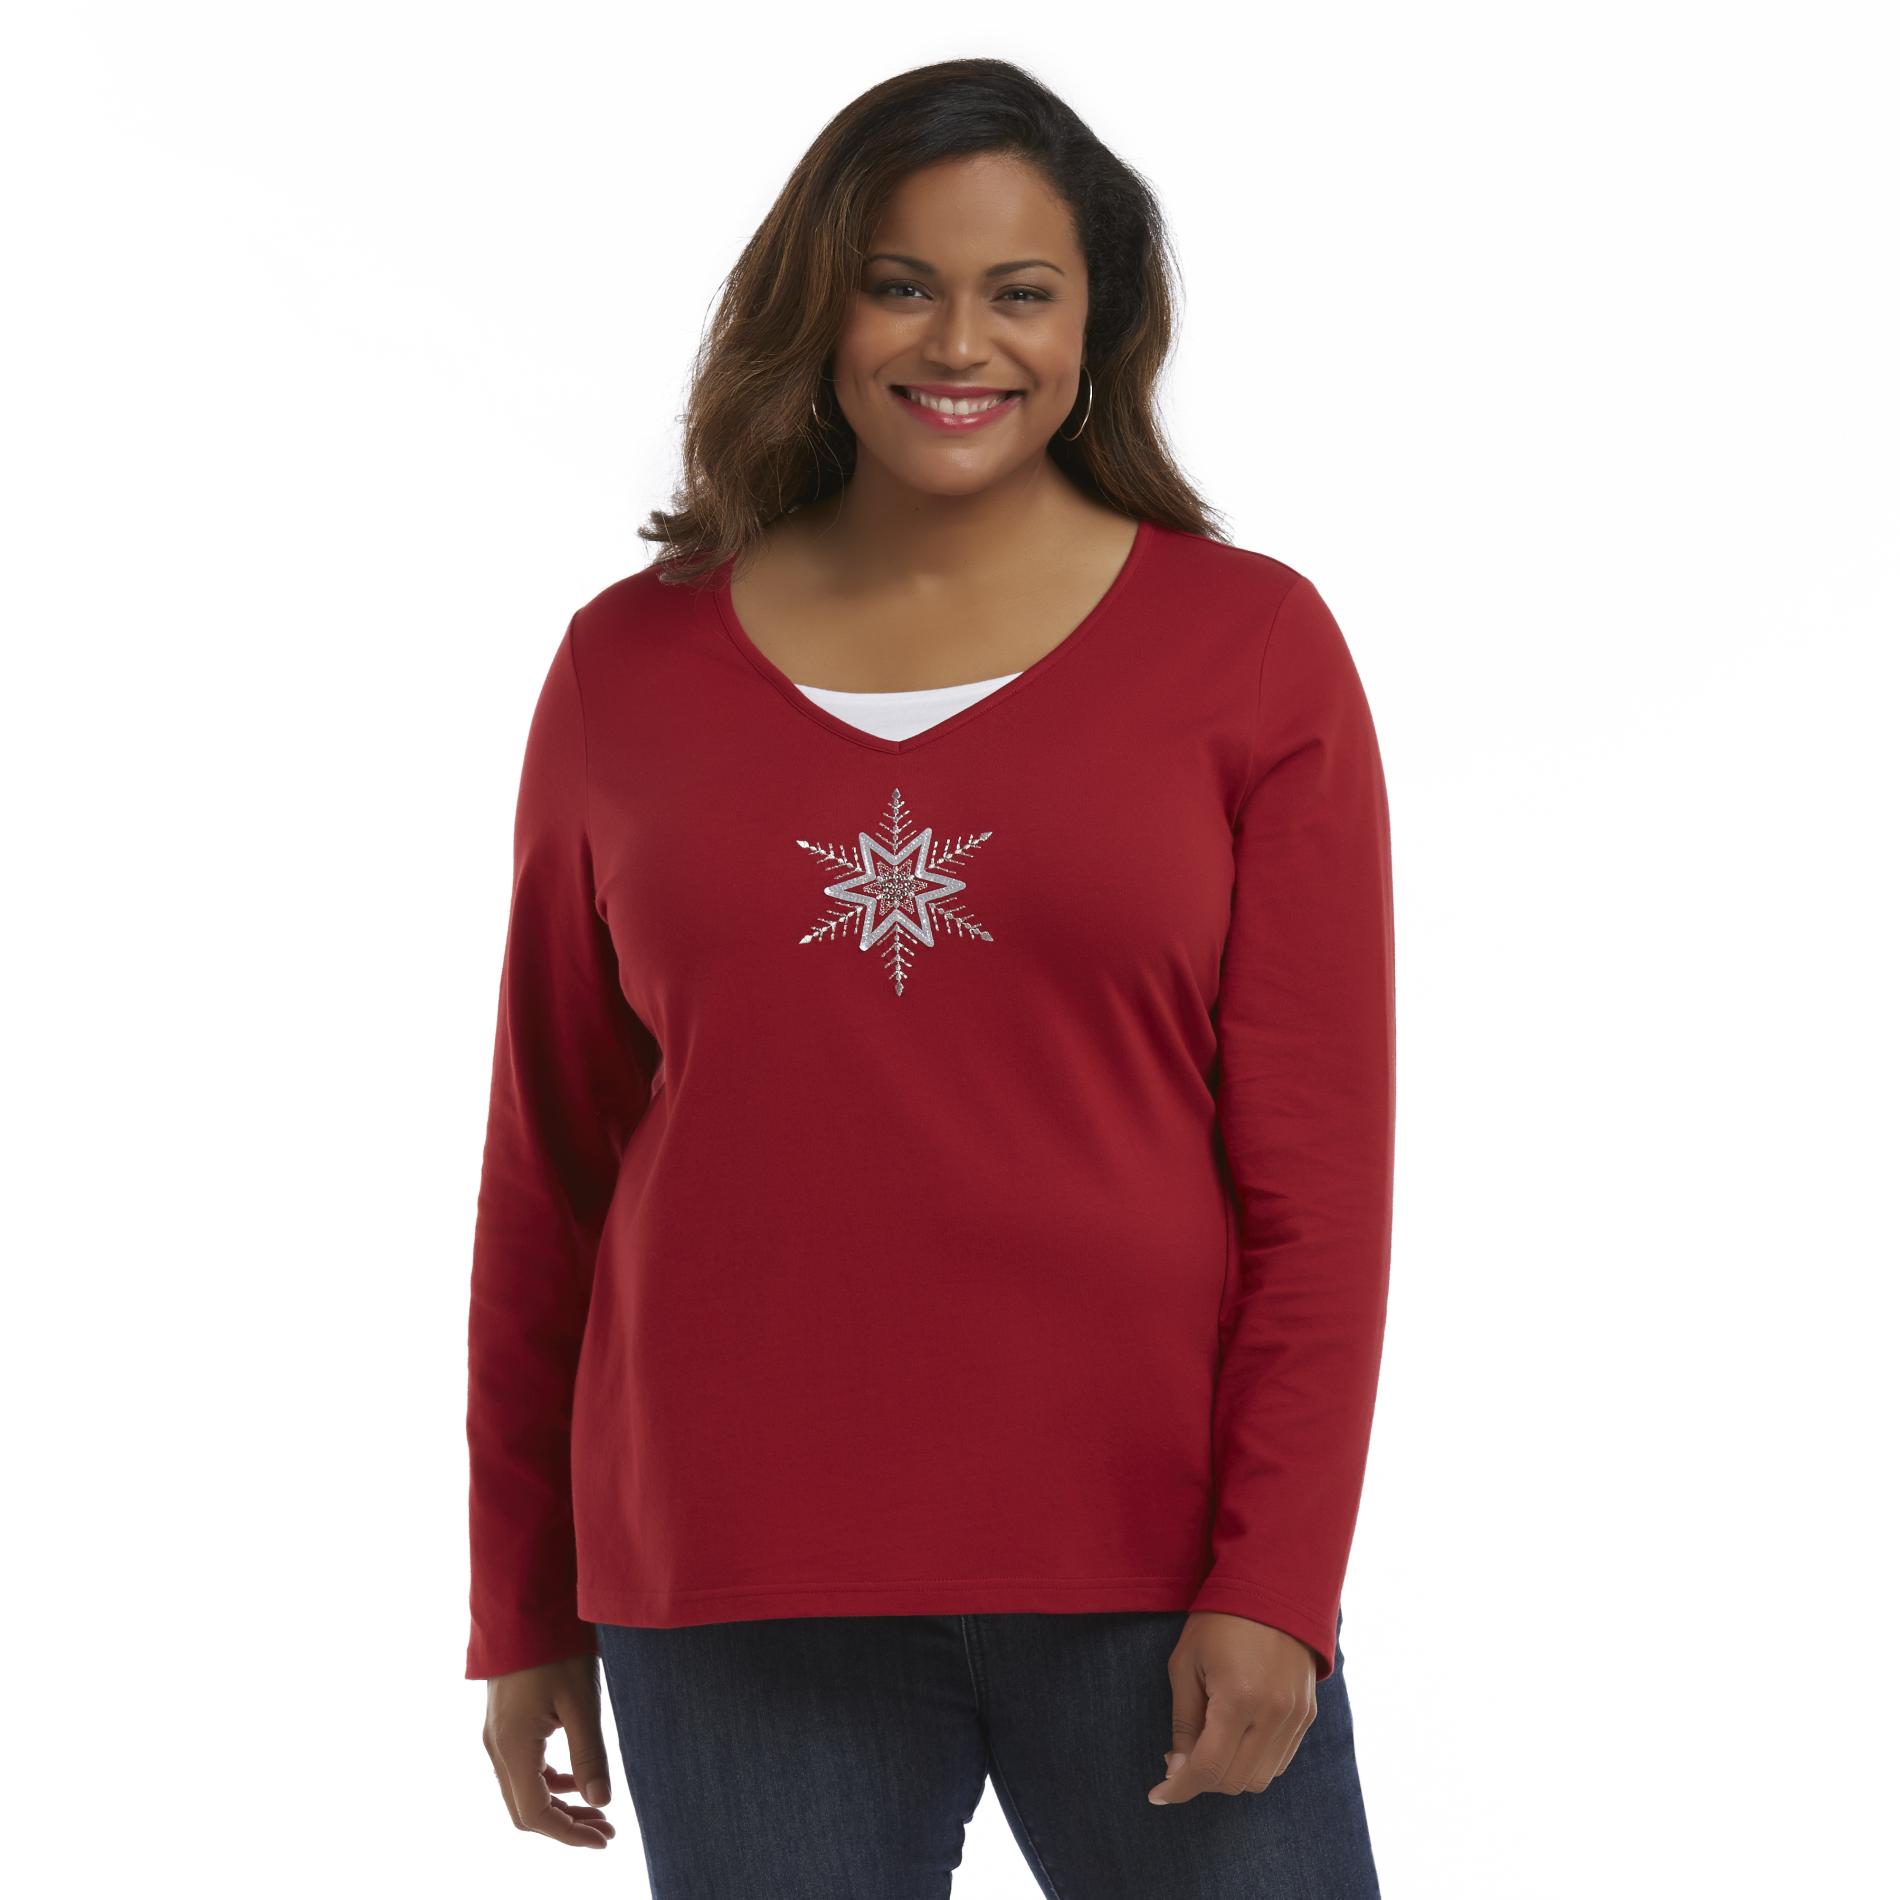 Holiday Editions Women's Plus Layered-Look Holiday Top - Snowflake